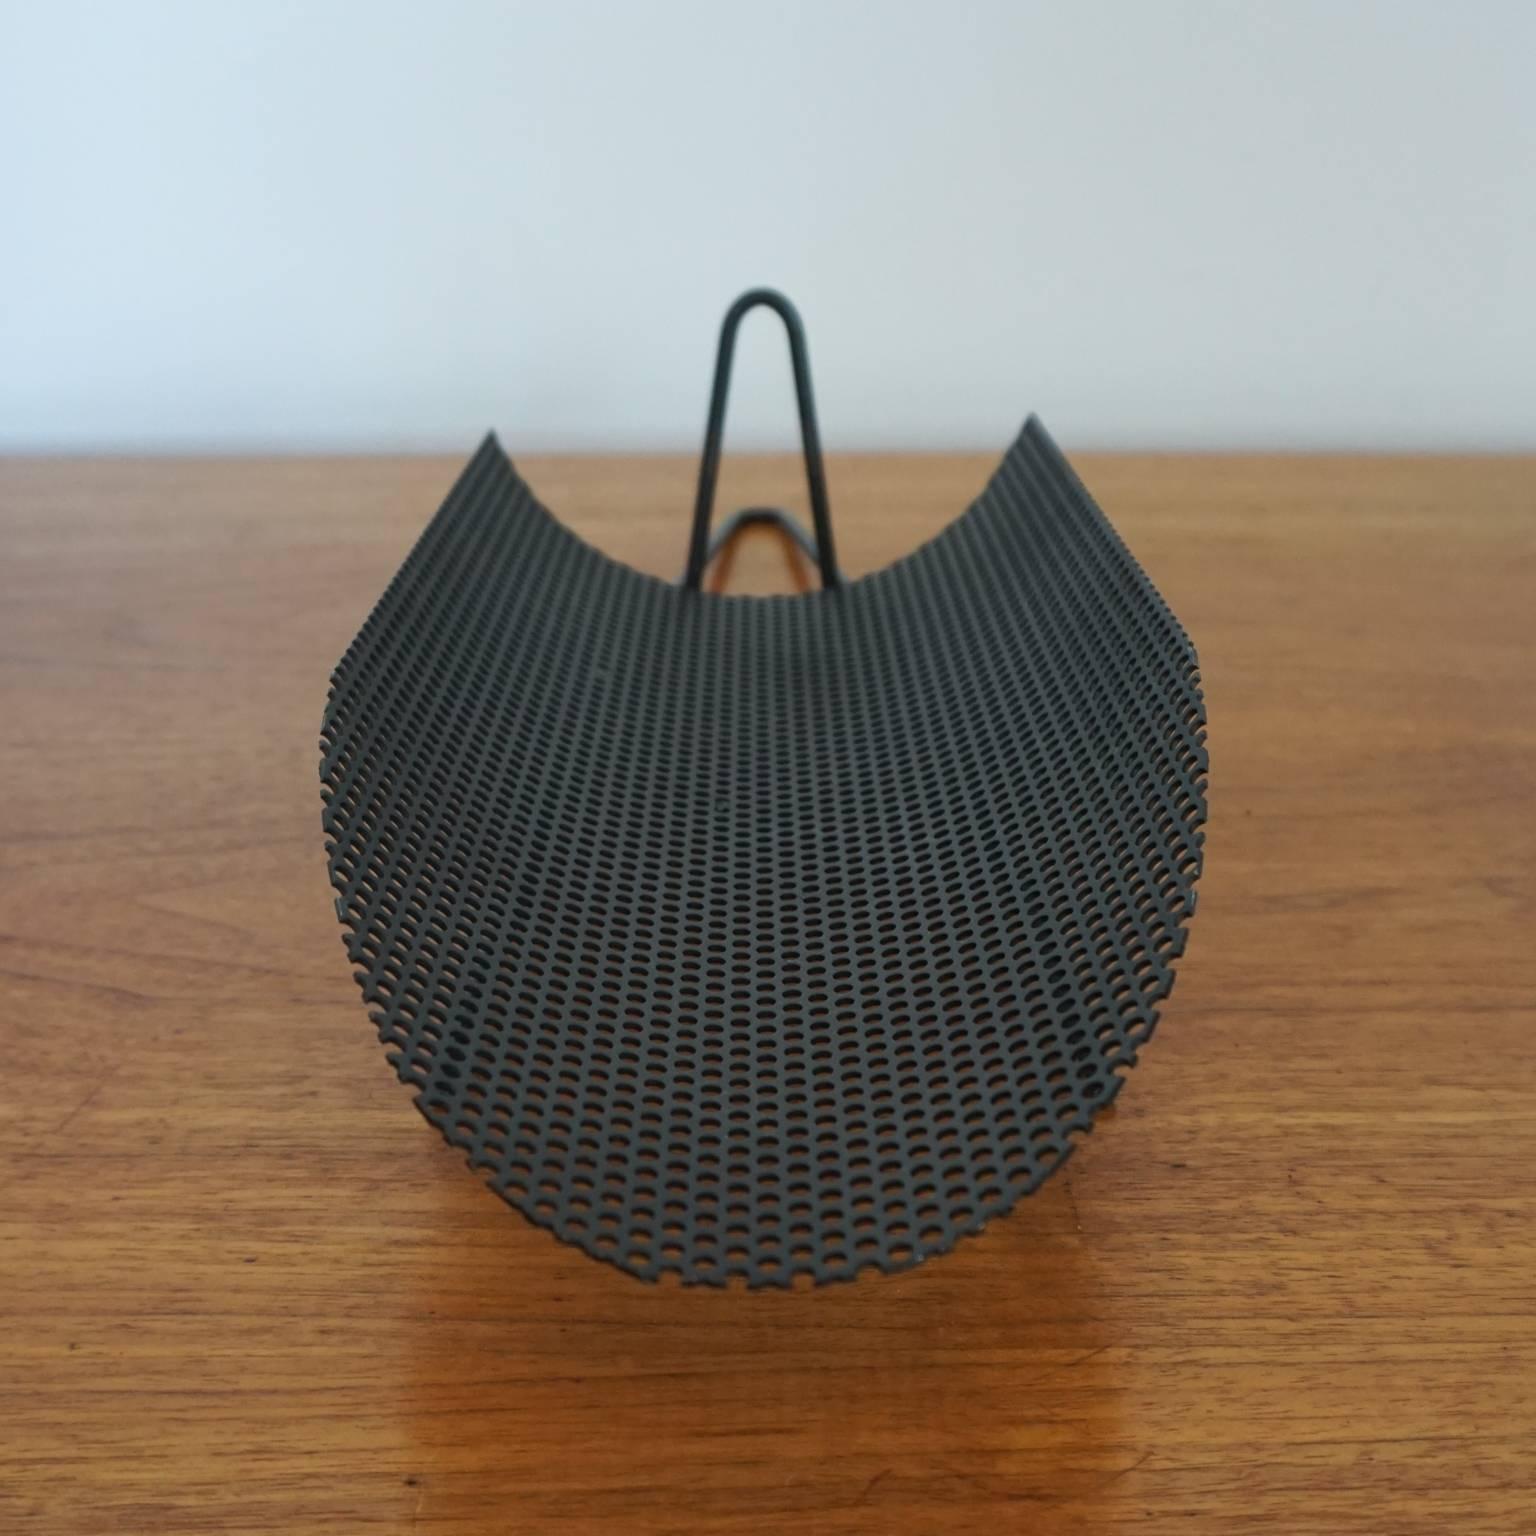 Mid-20th Century 1950s Perforated Metal Wine Bottle Holder